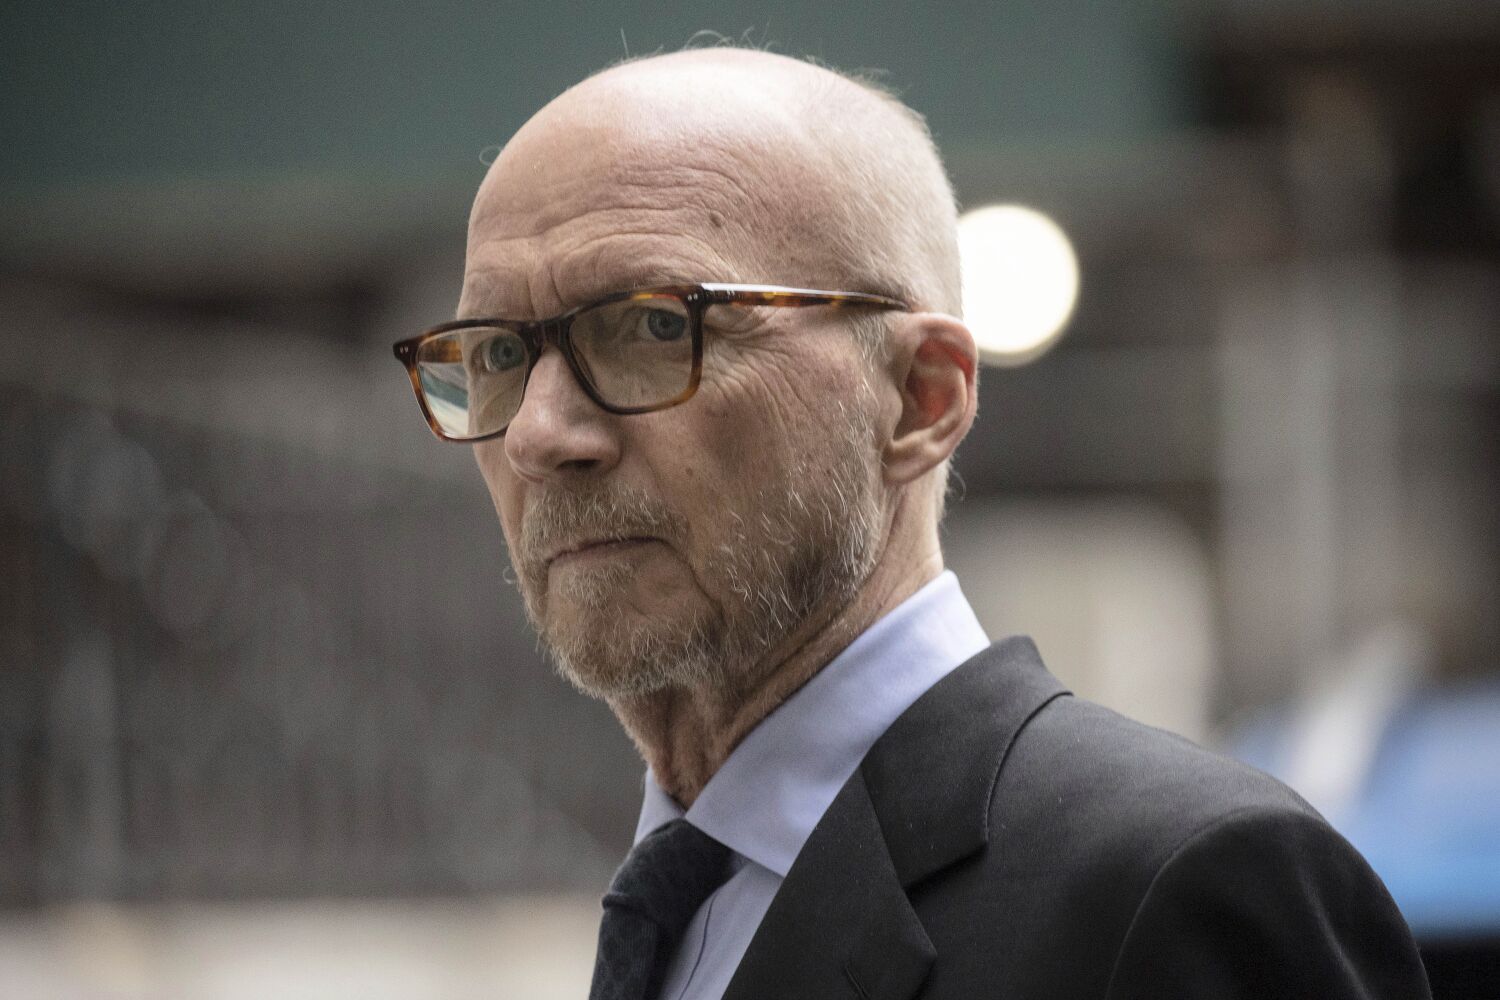 A city council in Canada votes to strip Paul Haggis' name from hometown park after rape lawsuit